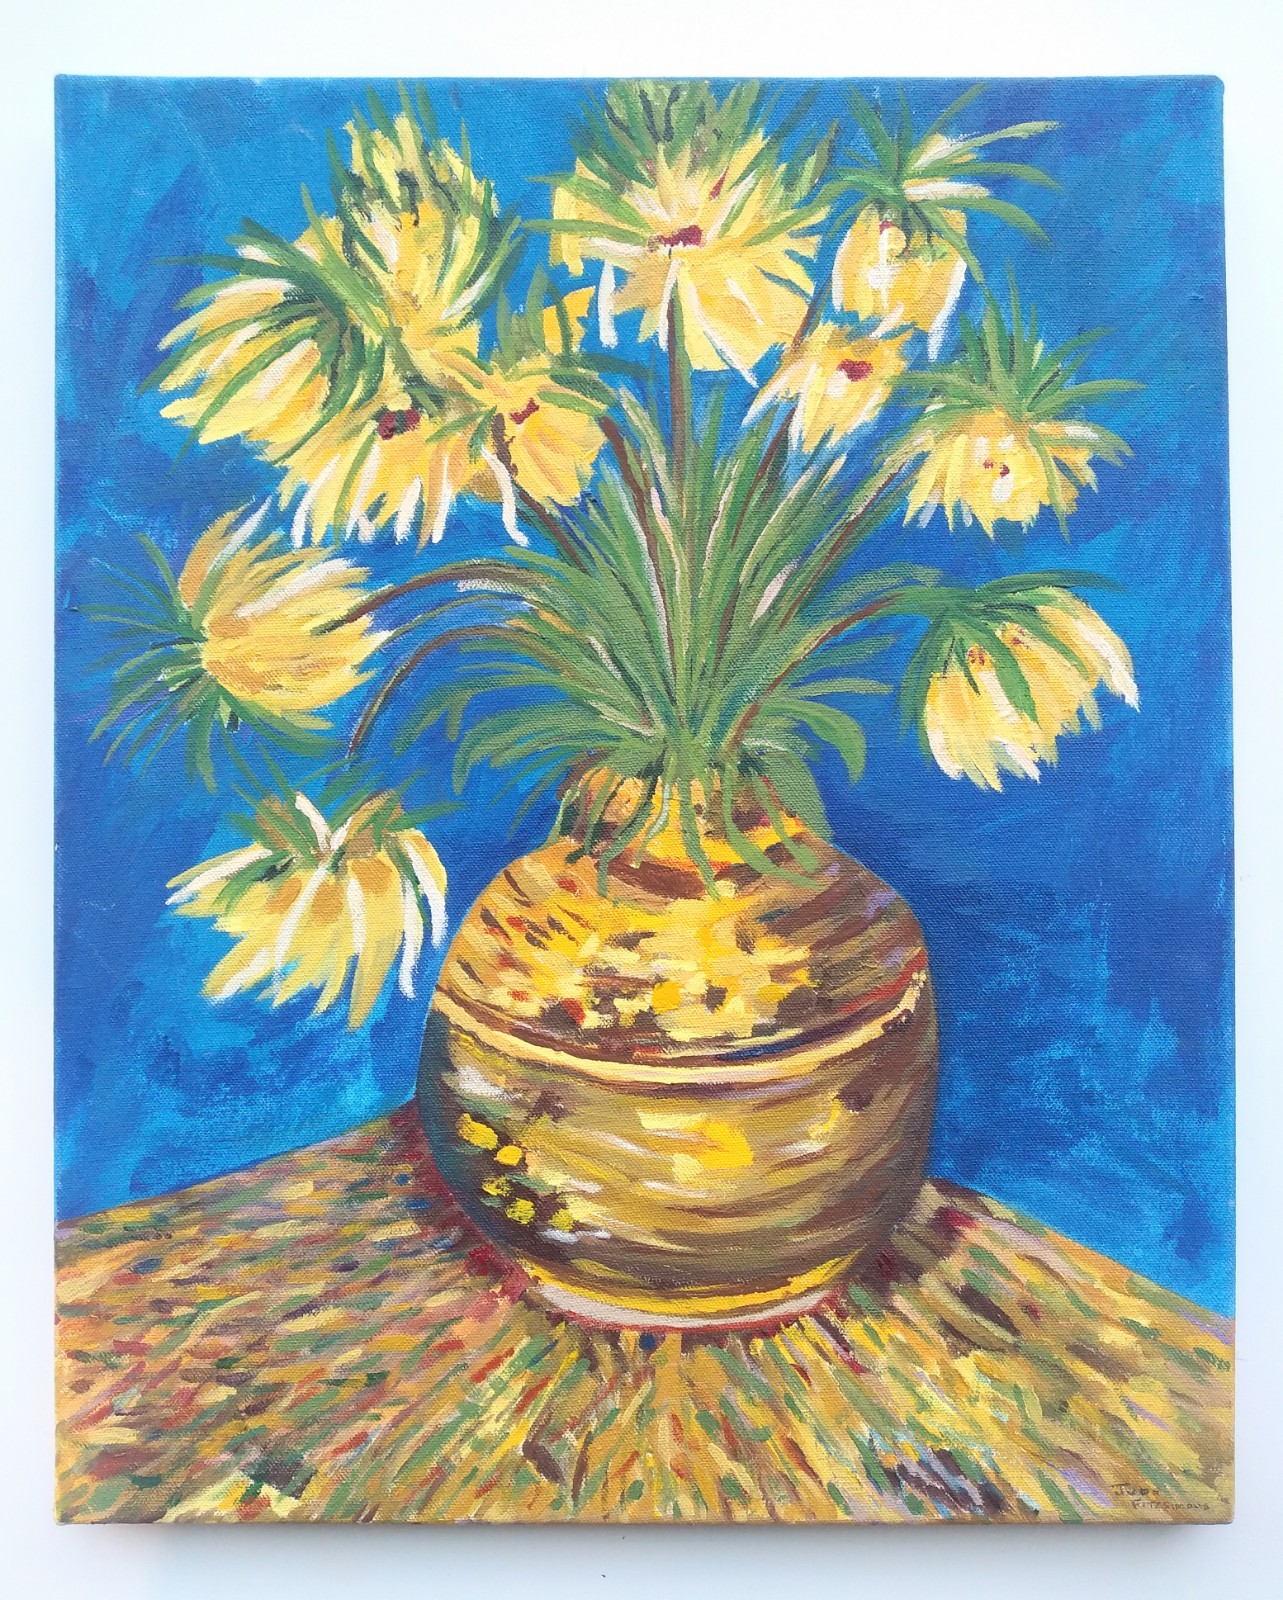 A yellow vase with yellow flowers on a corner yellow table in front of a blue background.